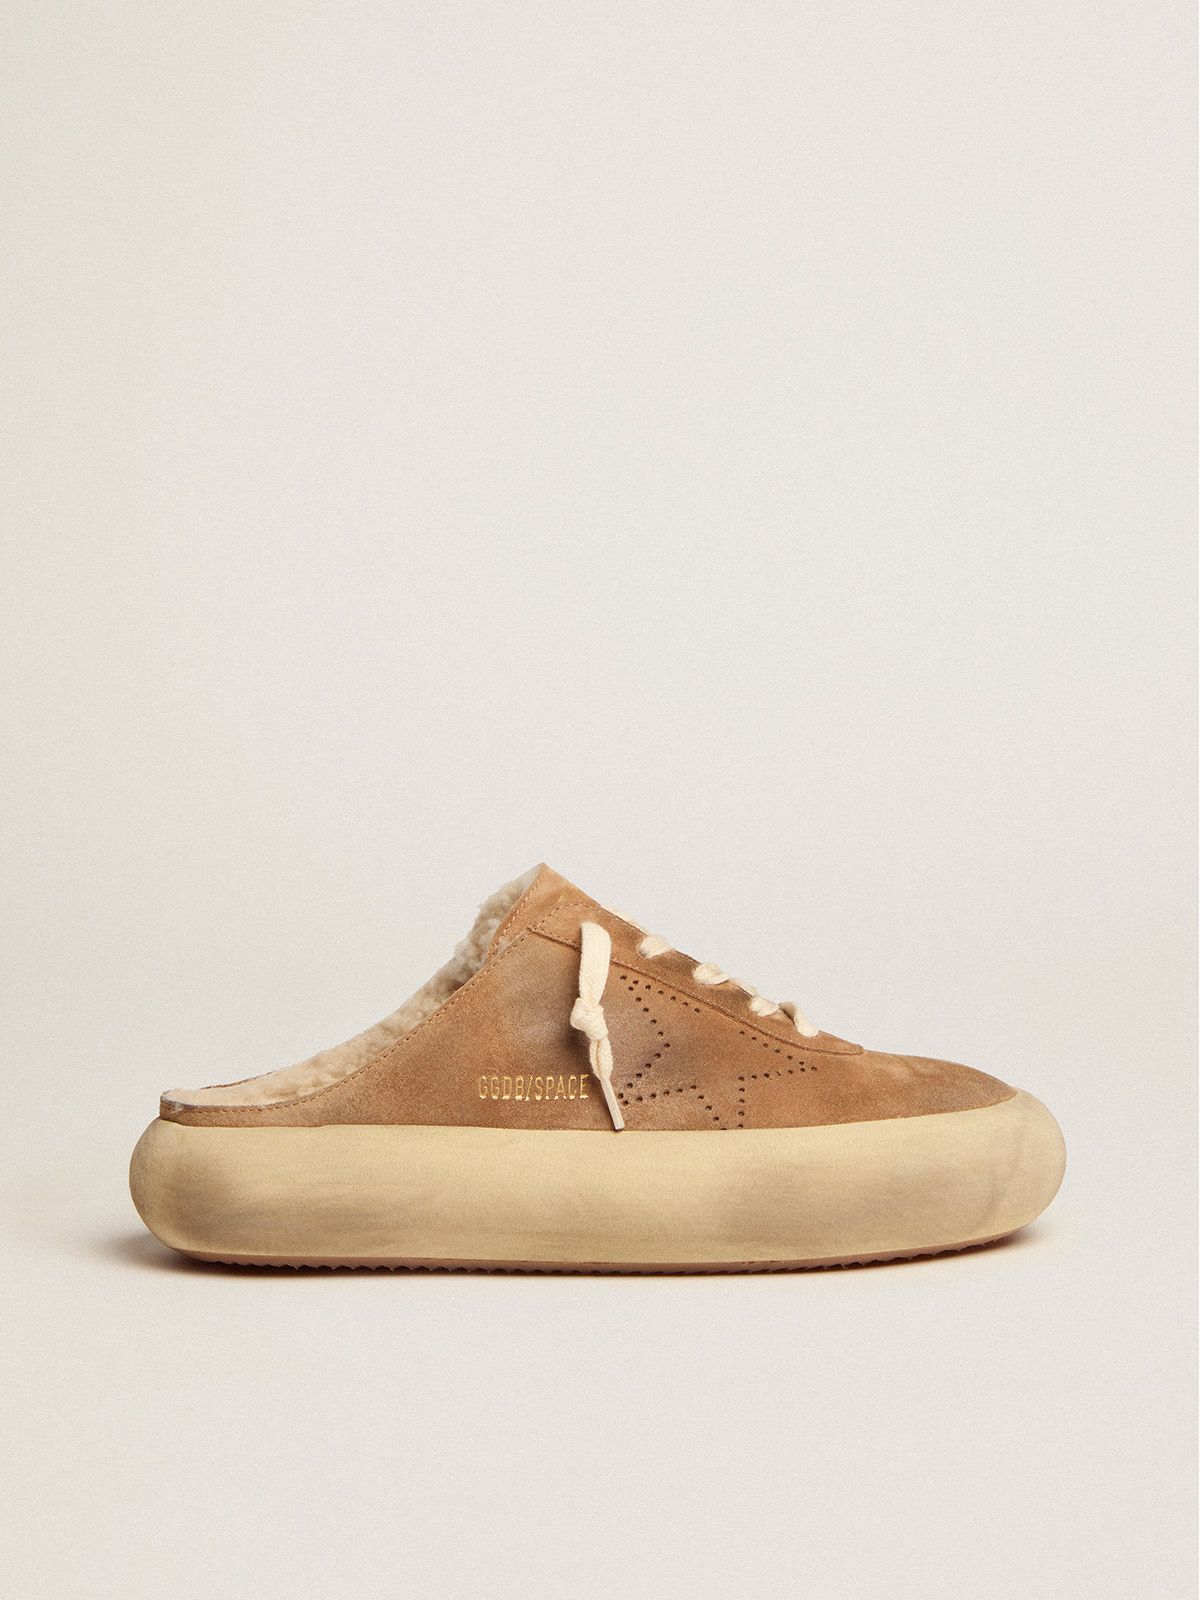 Space-Star Sabot shoes in tobacco-colored suede with shearling lining | 